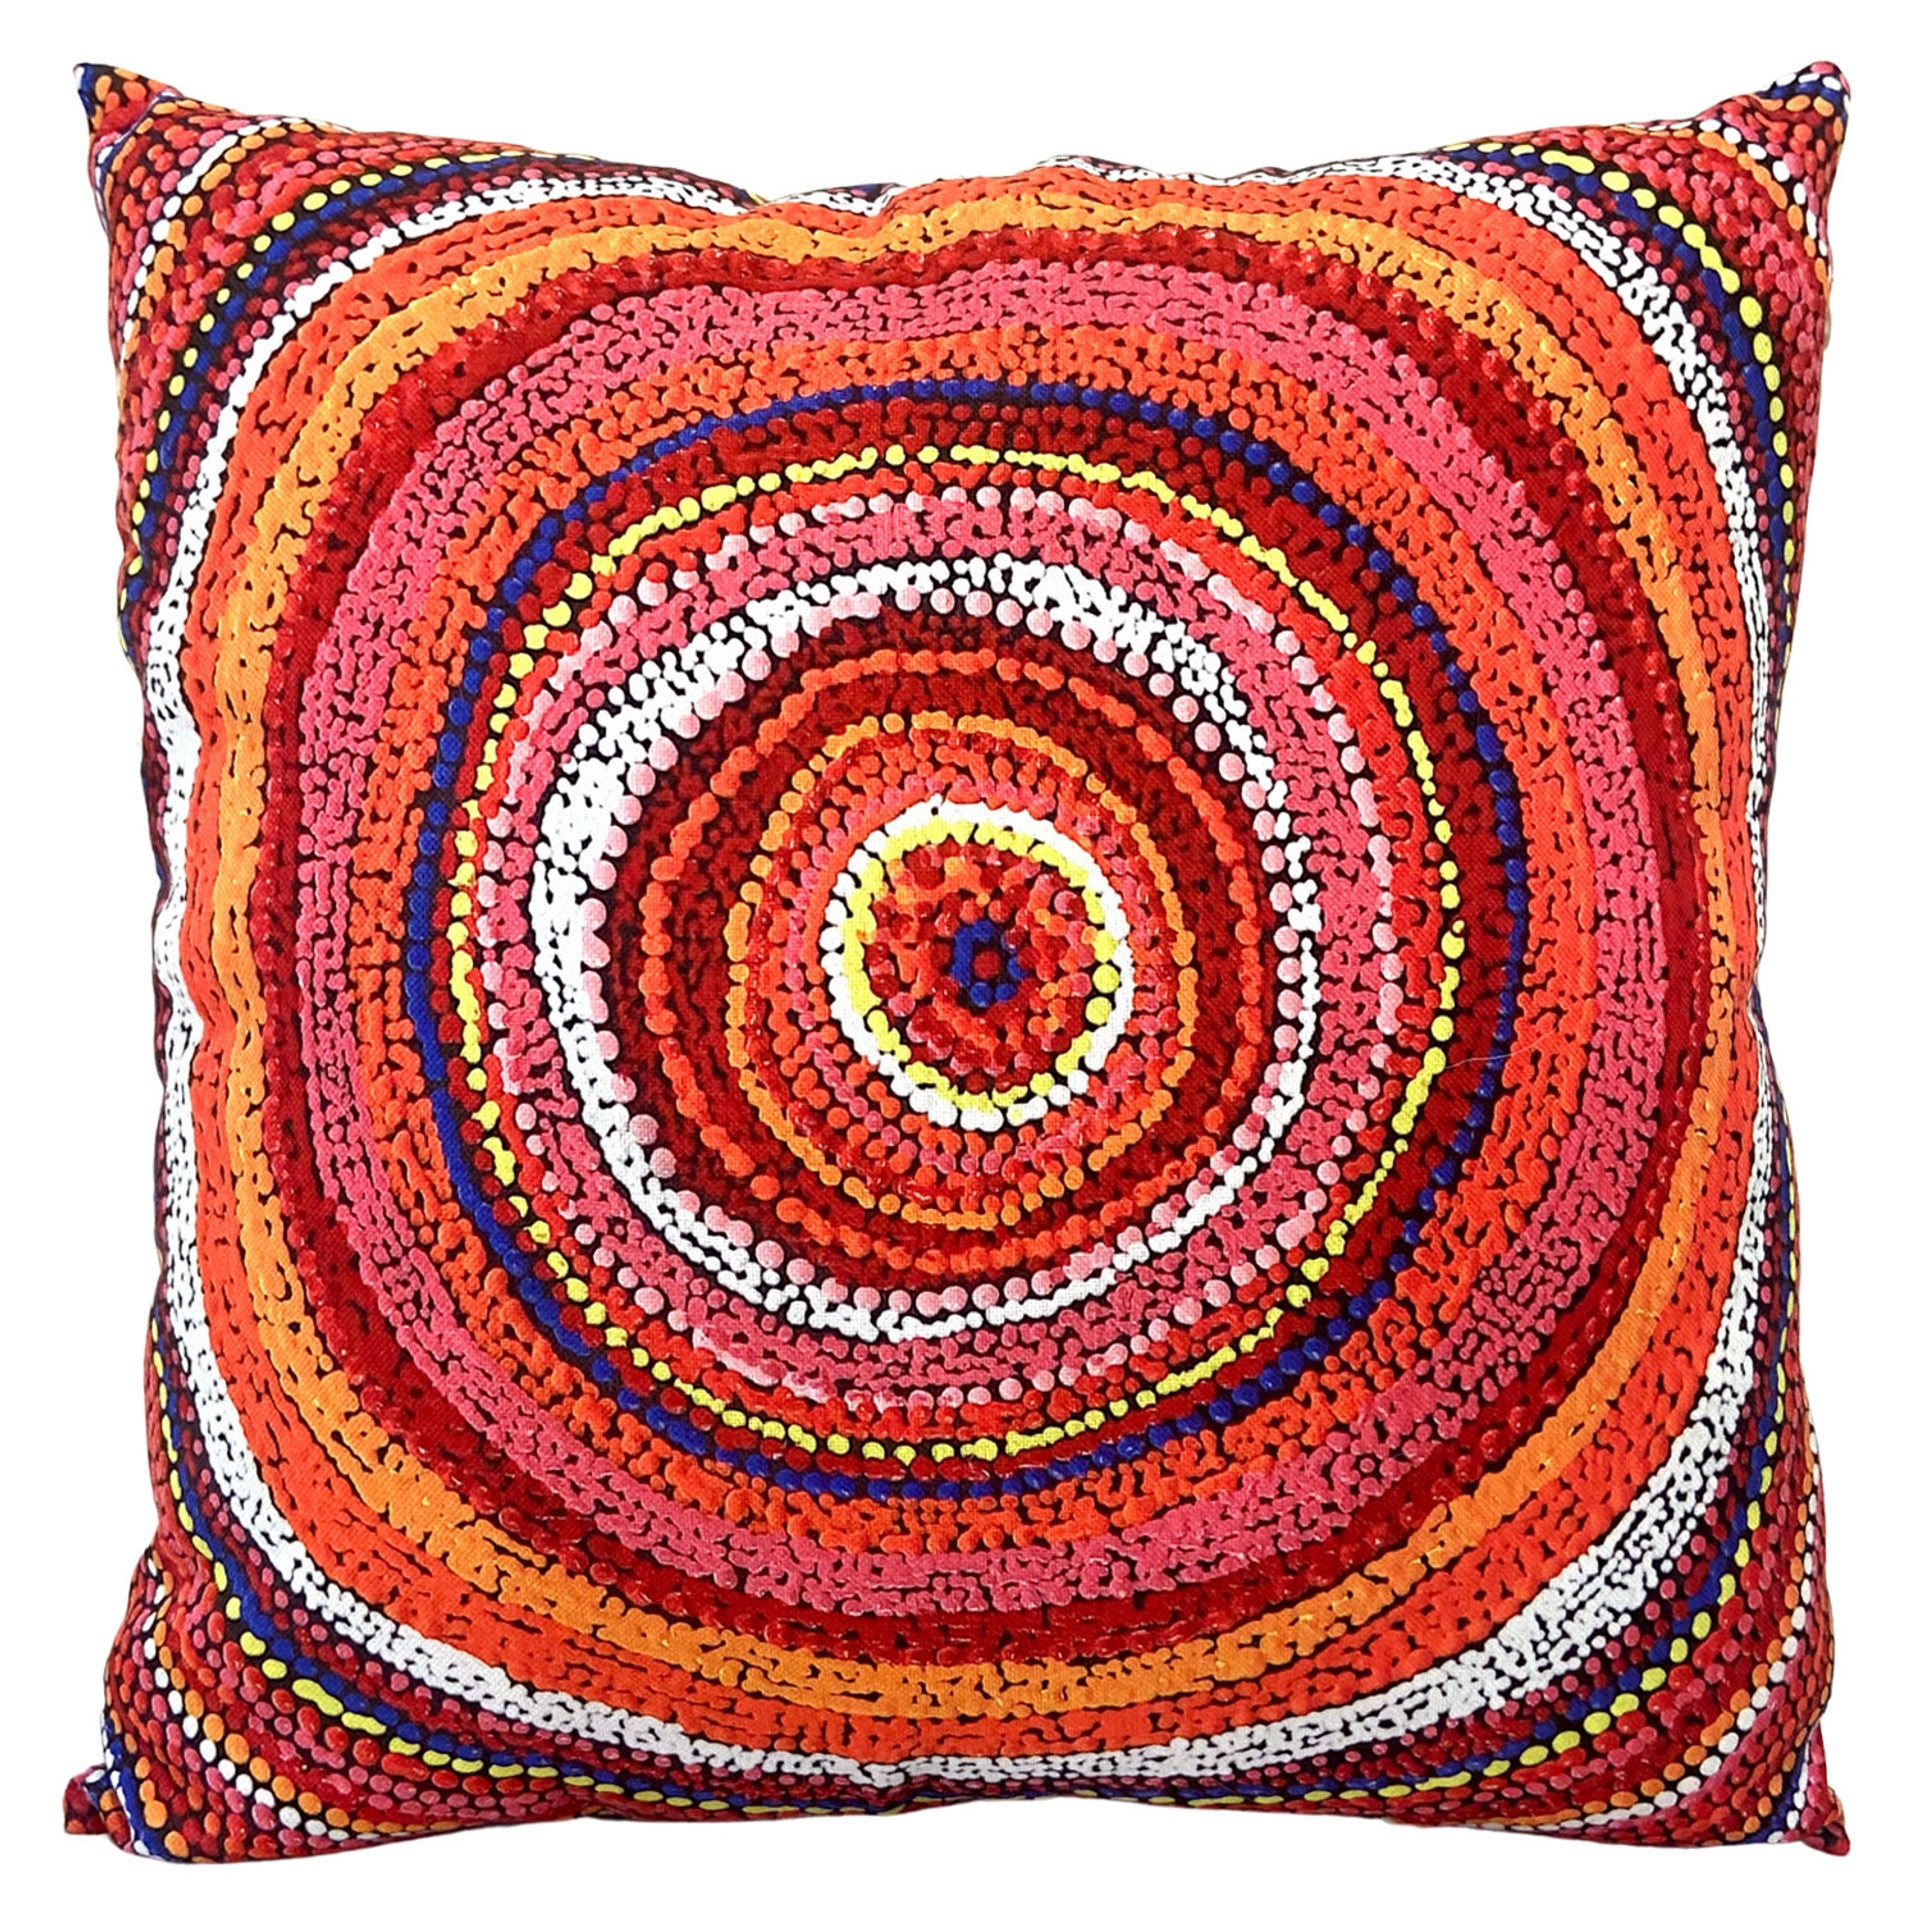 Cushion Cover - Barbara Weir - Sunrise of my Mother's Country